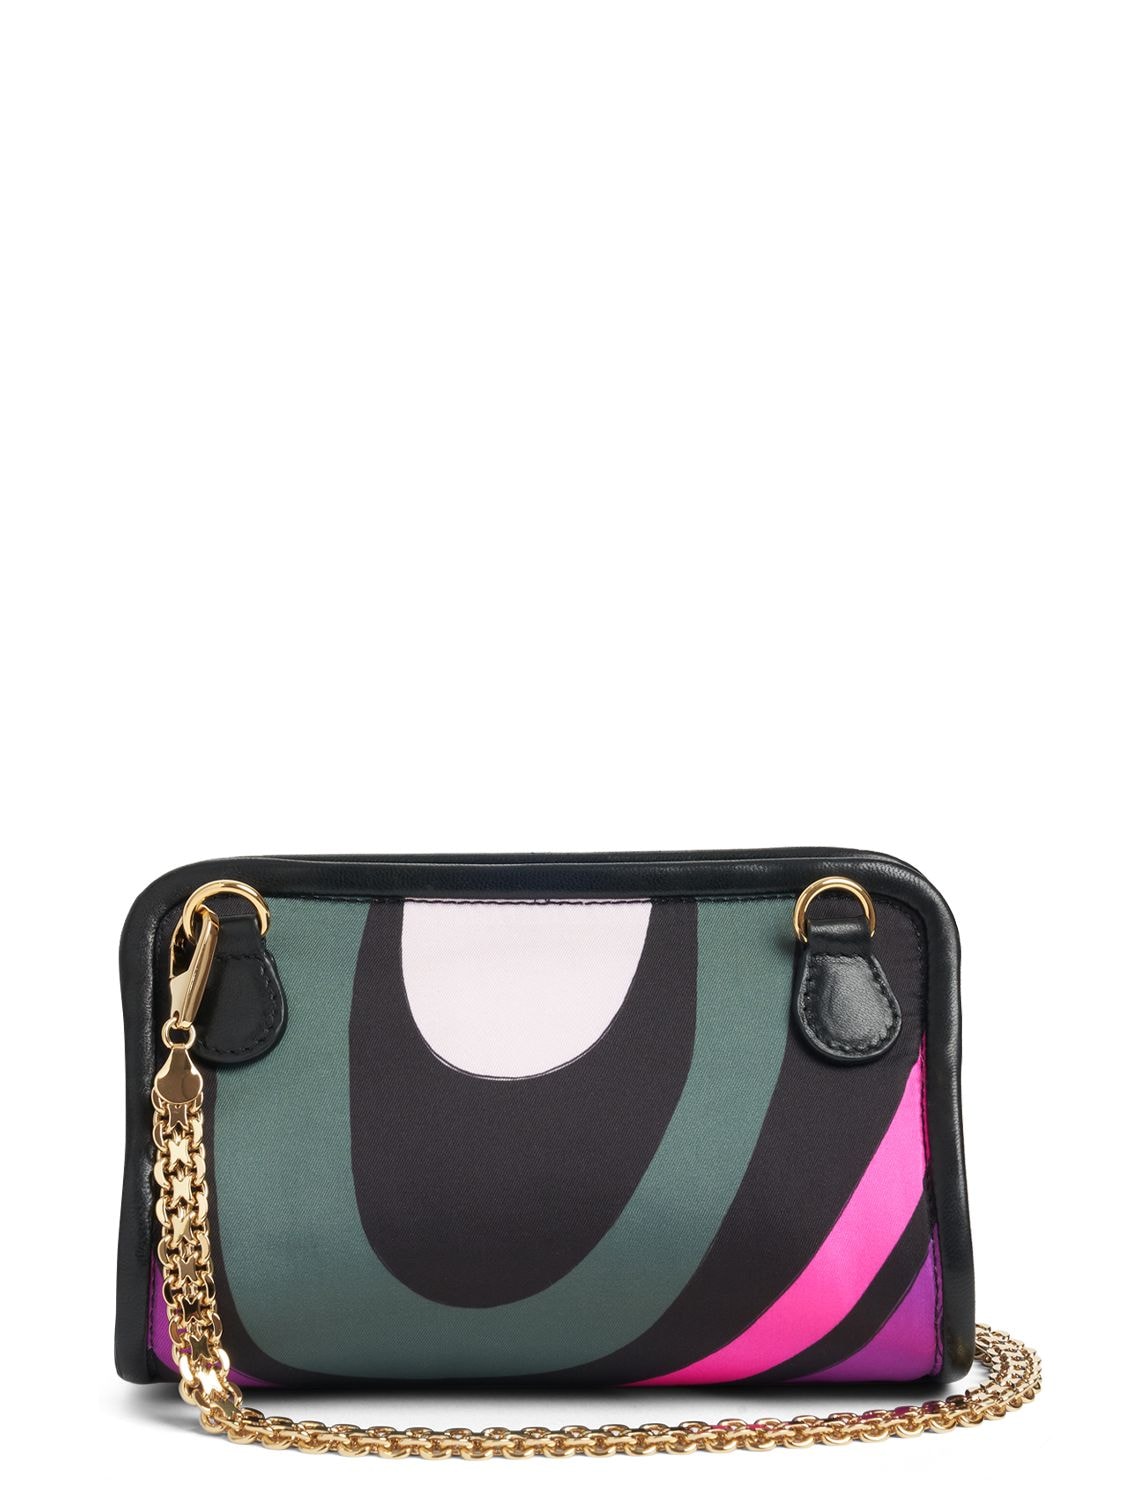 Shop Pucci Printed Twill Binding Pouch In Fuchsia,verde